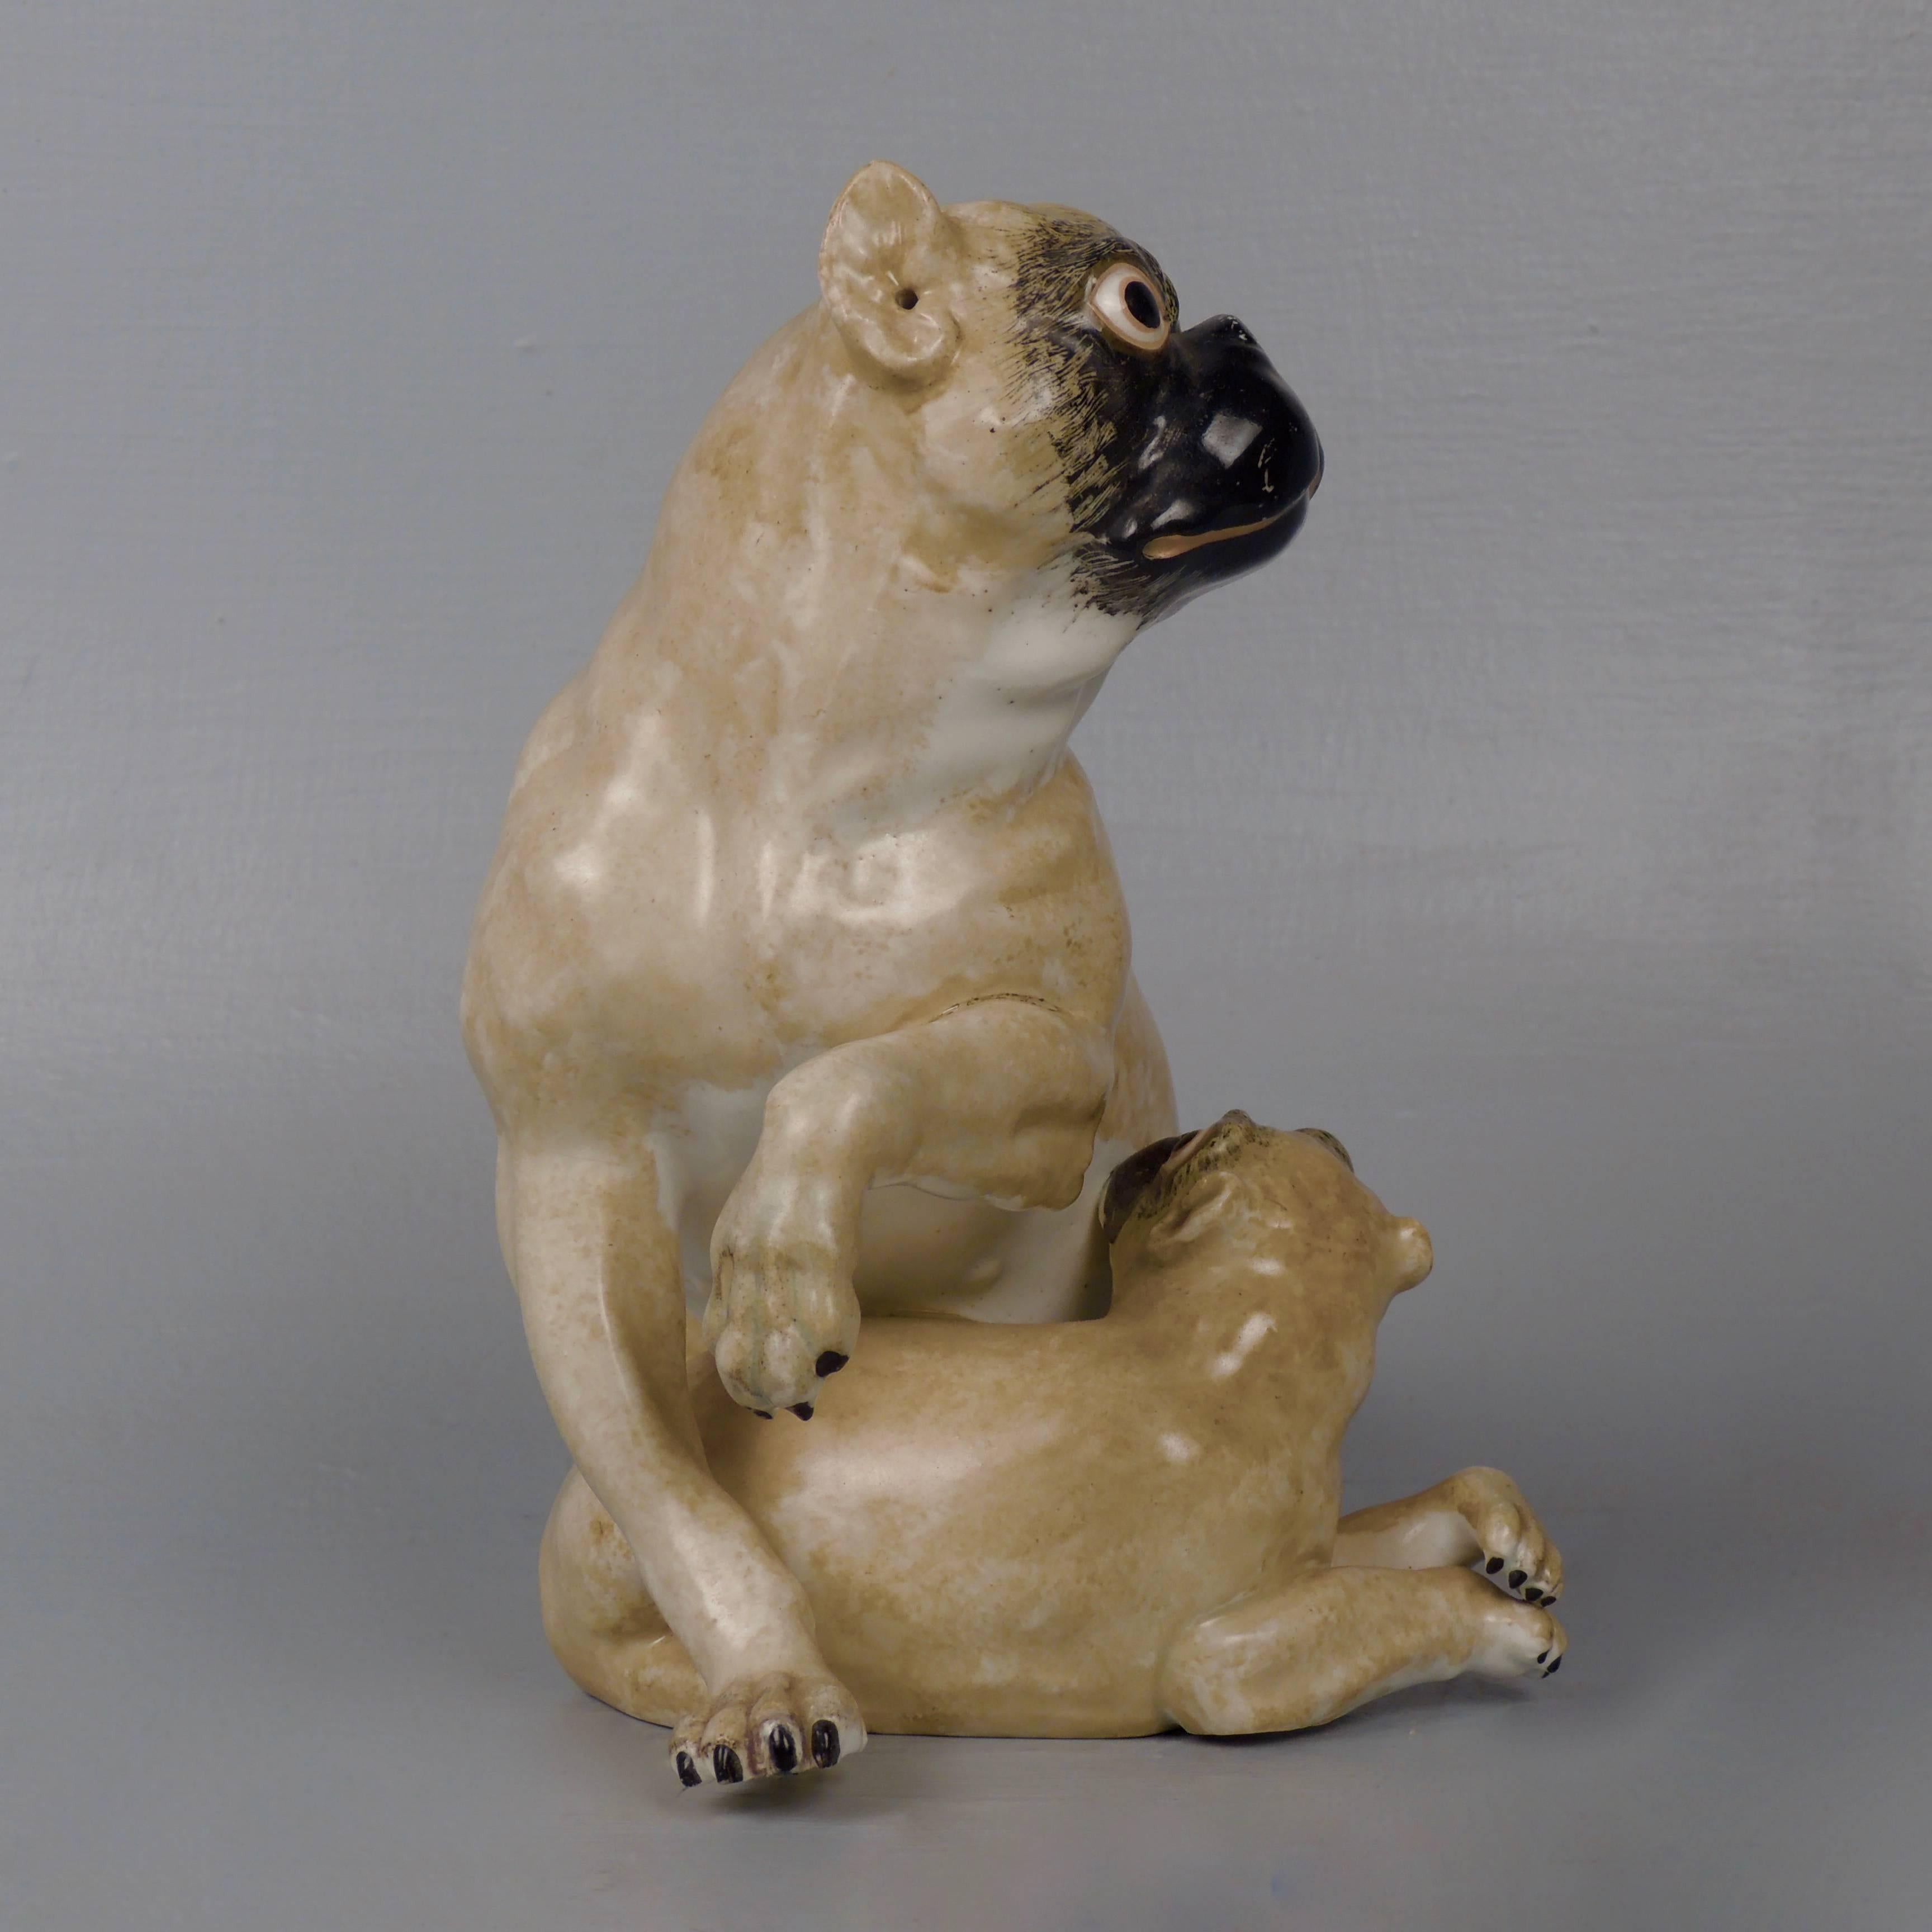 A rare, early 19th century English hard-paste porcelain pug & puppy figurine. 

These early English figurines are all modeled after the Meissen factory's first Pug model by J. Kaendler (in an attempt to reproduce his fashionable style that had taken